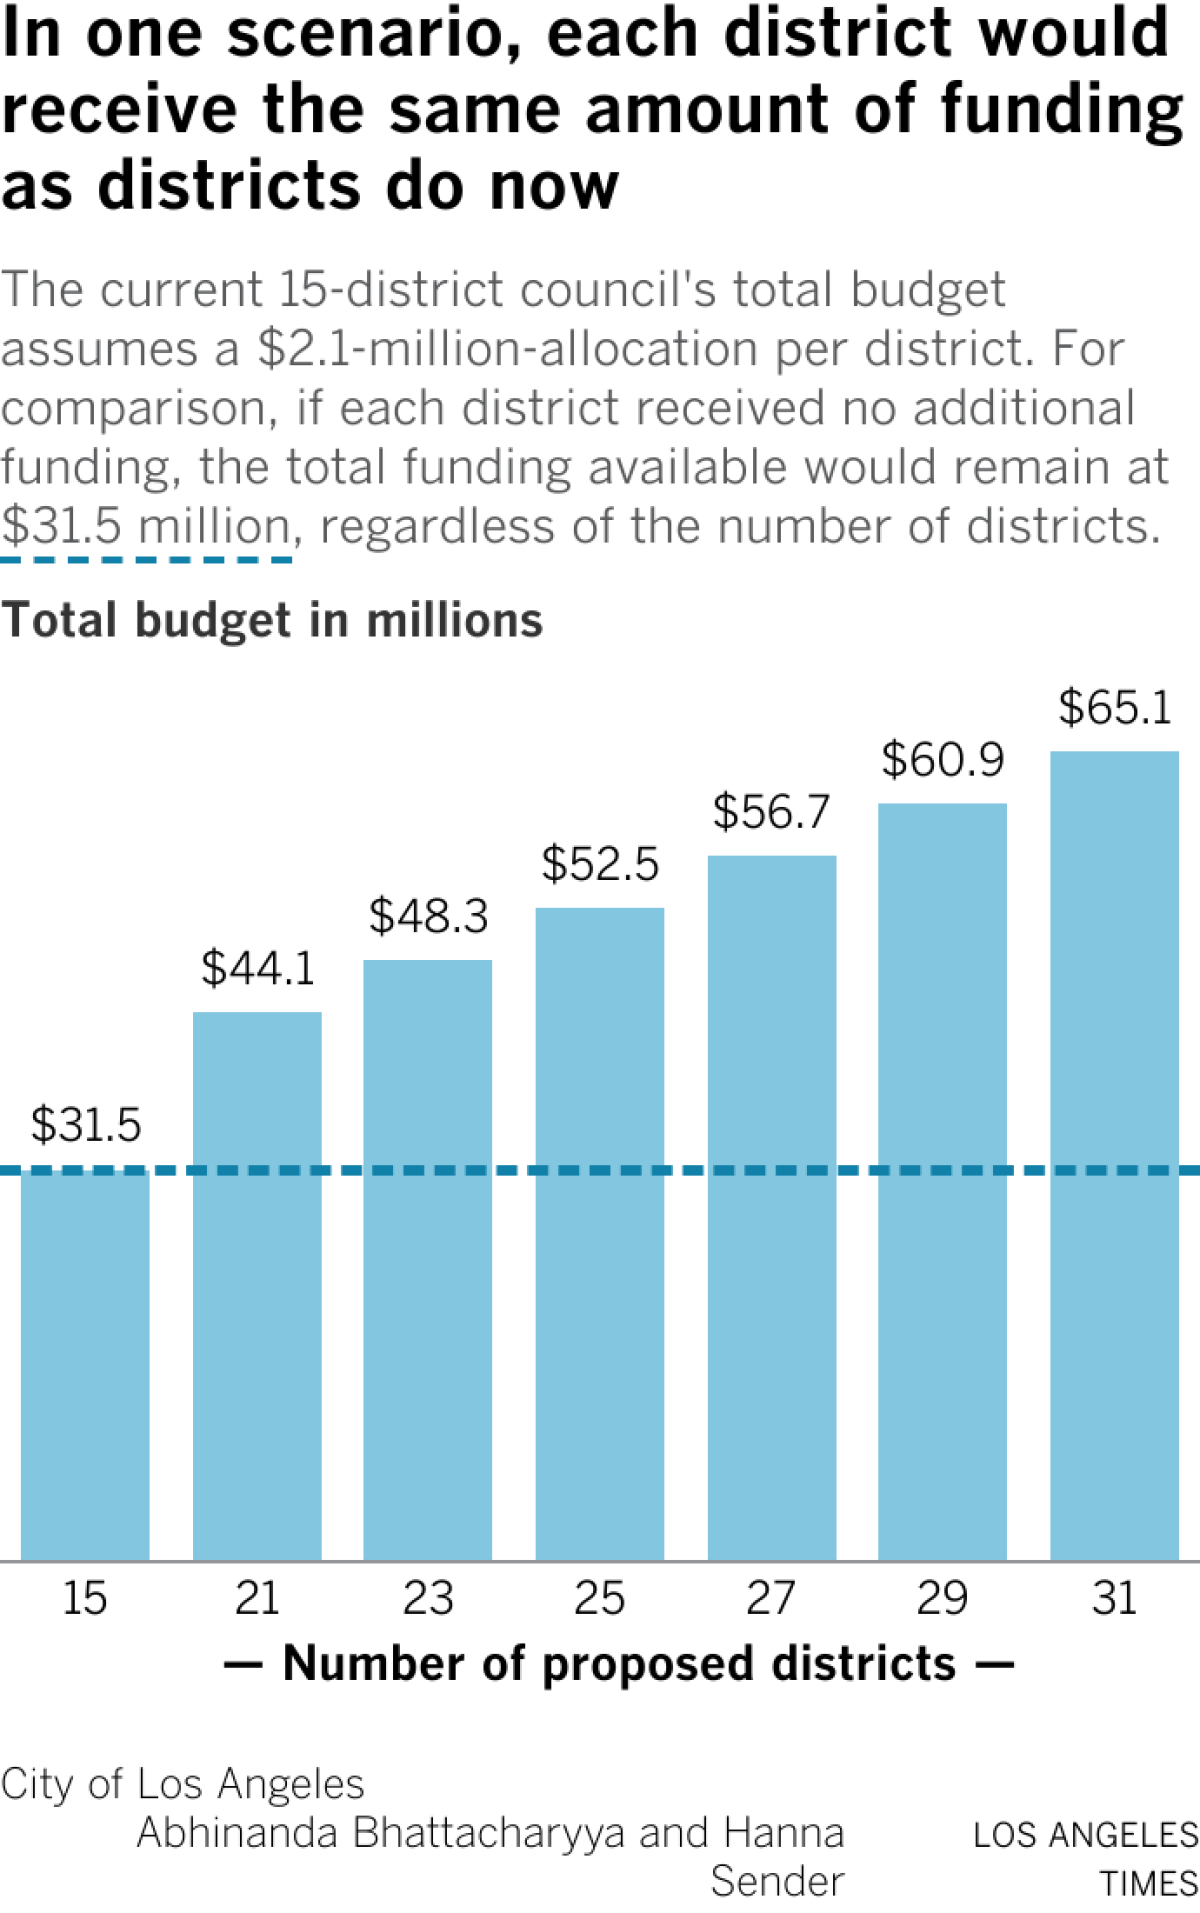 Bar chart showing the total funding that would be available if each district received $2.1 million in funding. In that scenario, the chart shows that the total funding available increases the greater the number of districts.